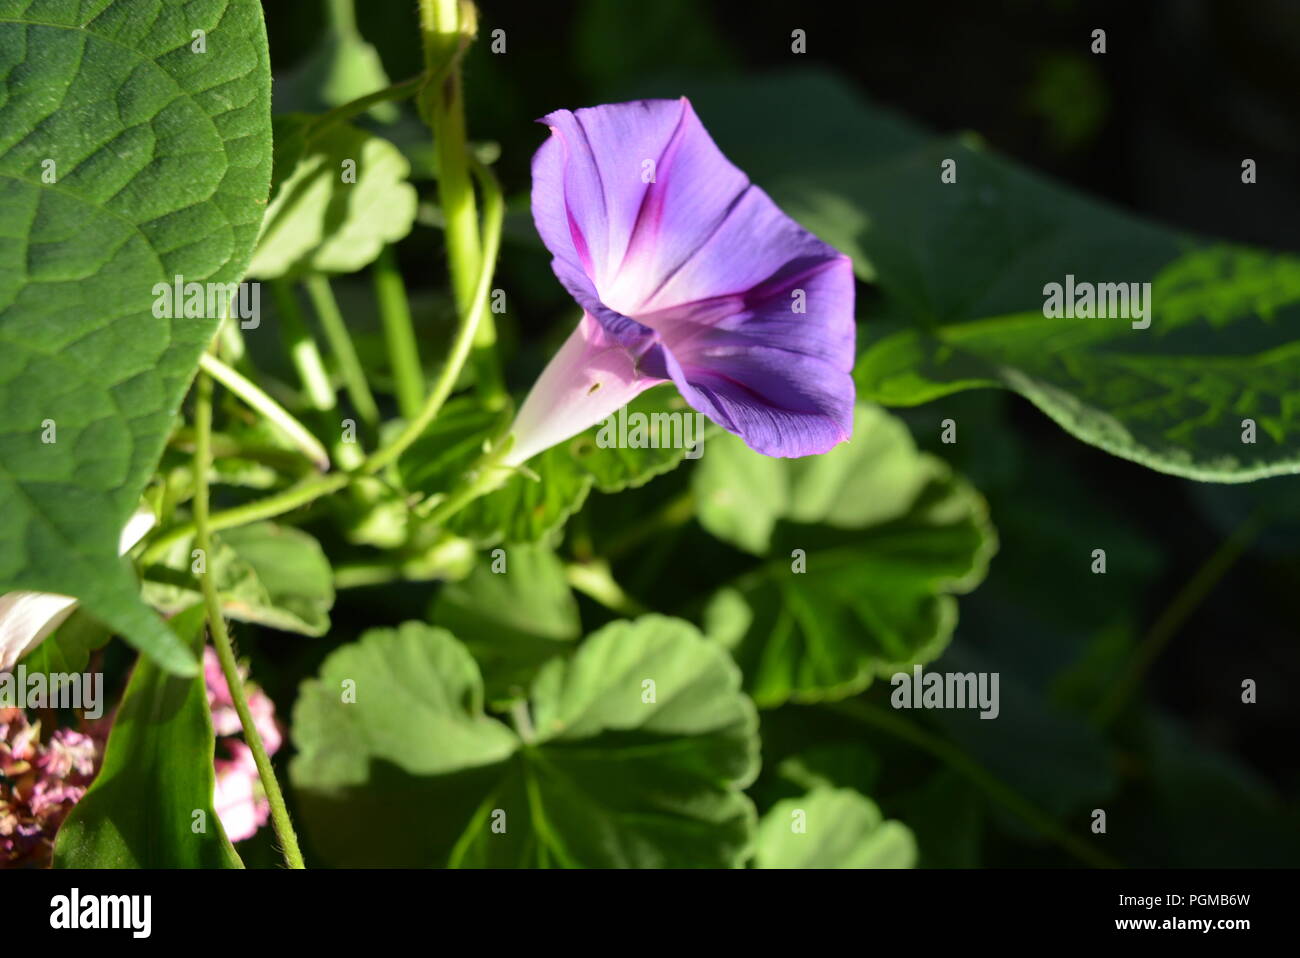 Saturated flowers of ipomoea or convolvulaceae with bright light foliage and a purple white blossom, morning glory, water convolvulus or kangkung Stock Photo